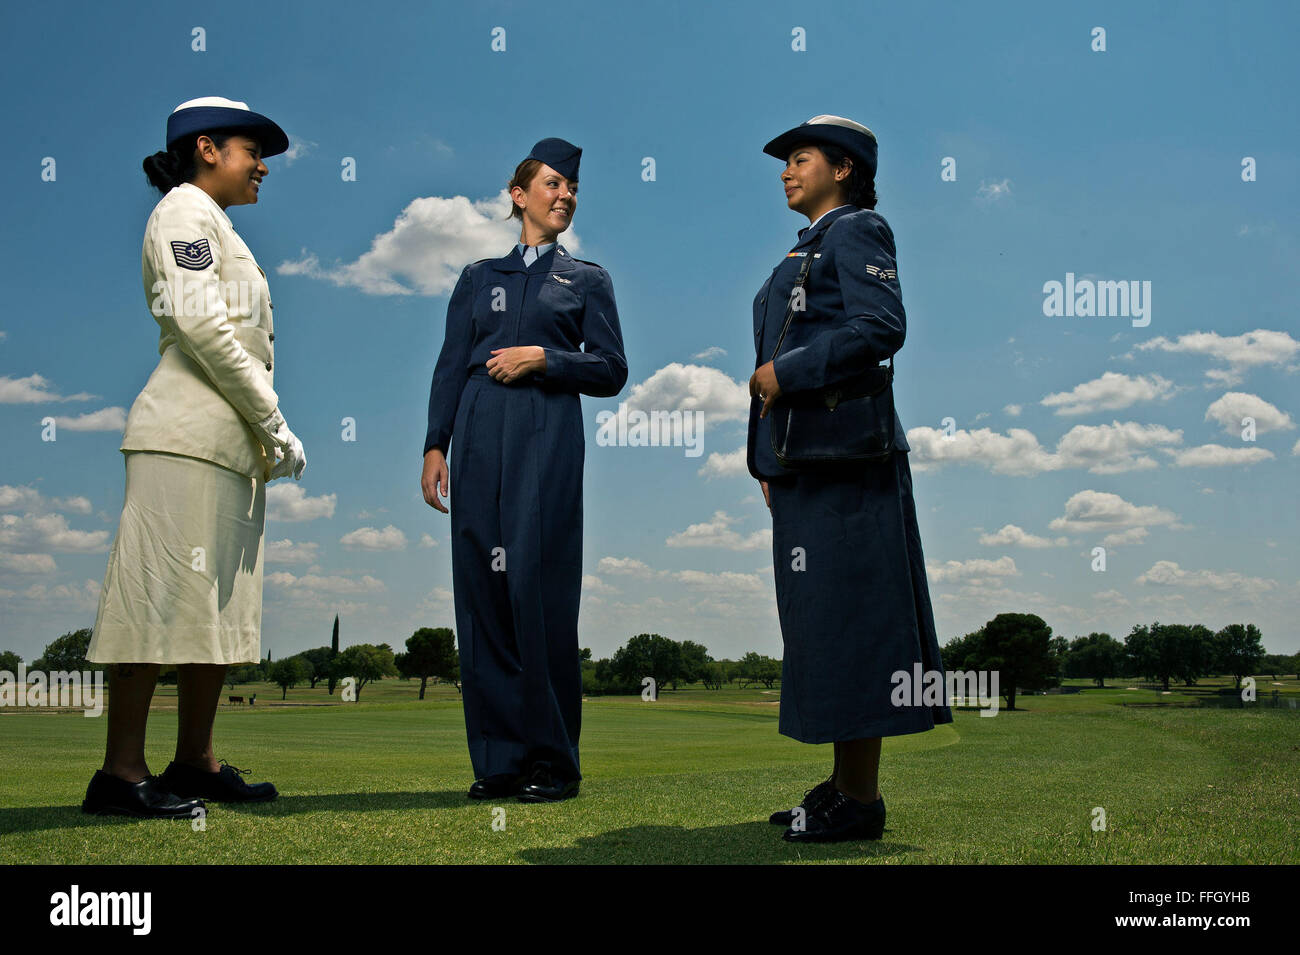 Airman 1st Class Leona Guy (left), Jill Logston (center) and Doris Hernandez wear various Women in the Air Force uniforms from the 1950s and 1960s. Guy is wearing the white summer service dress, Logston the Shade 84 WAF Nursing Flight Jacket and Hernandez the Shade 84 WAF service dress. Stock Photo